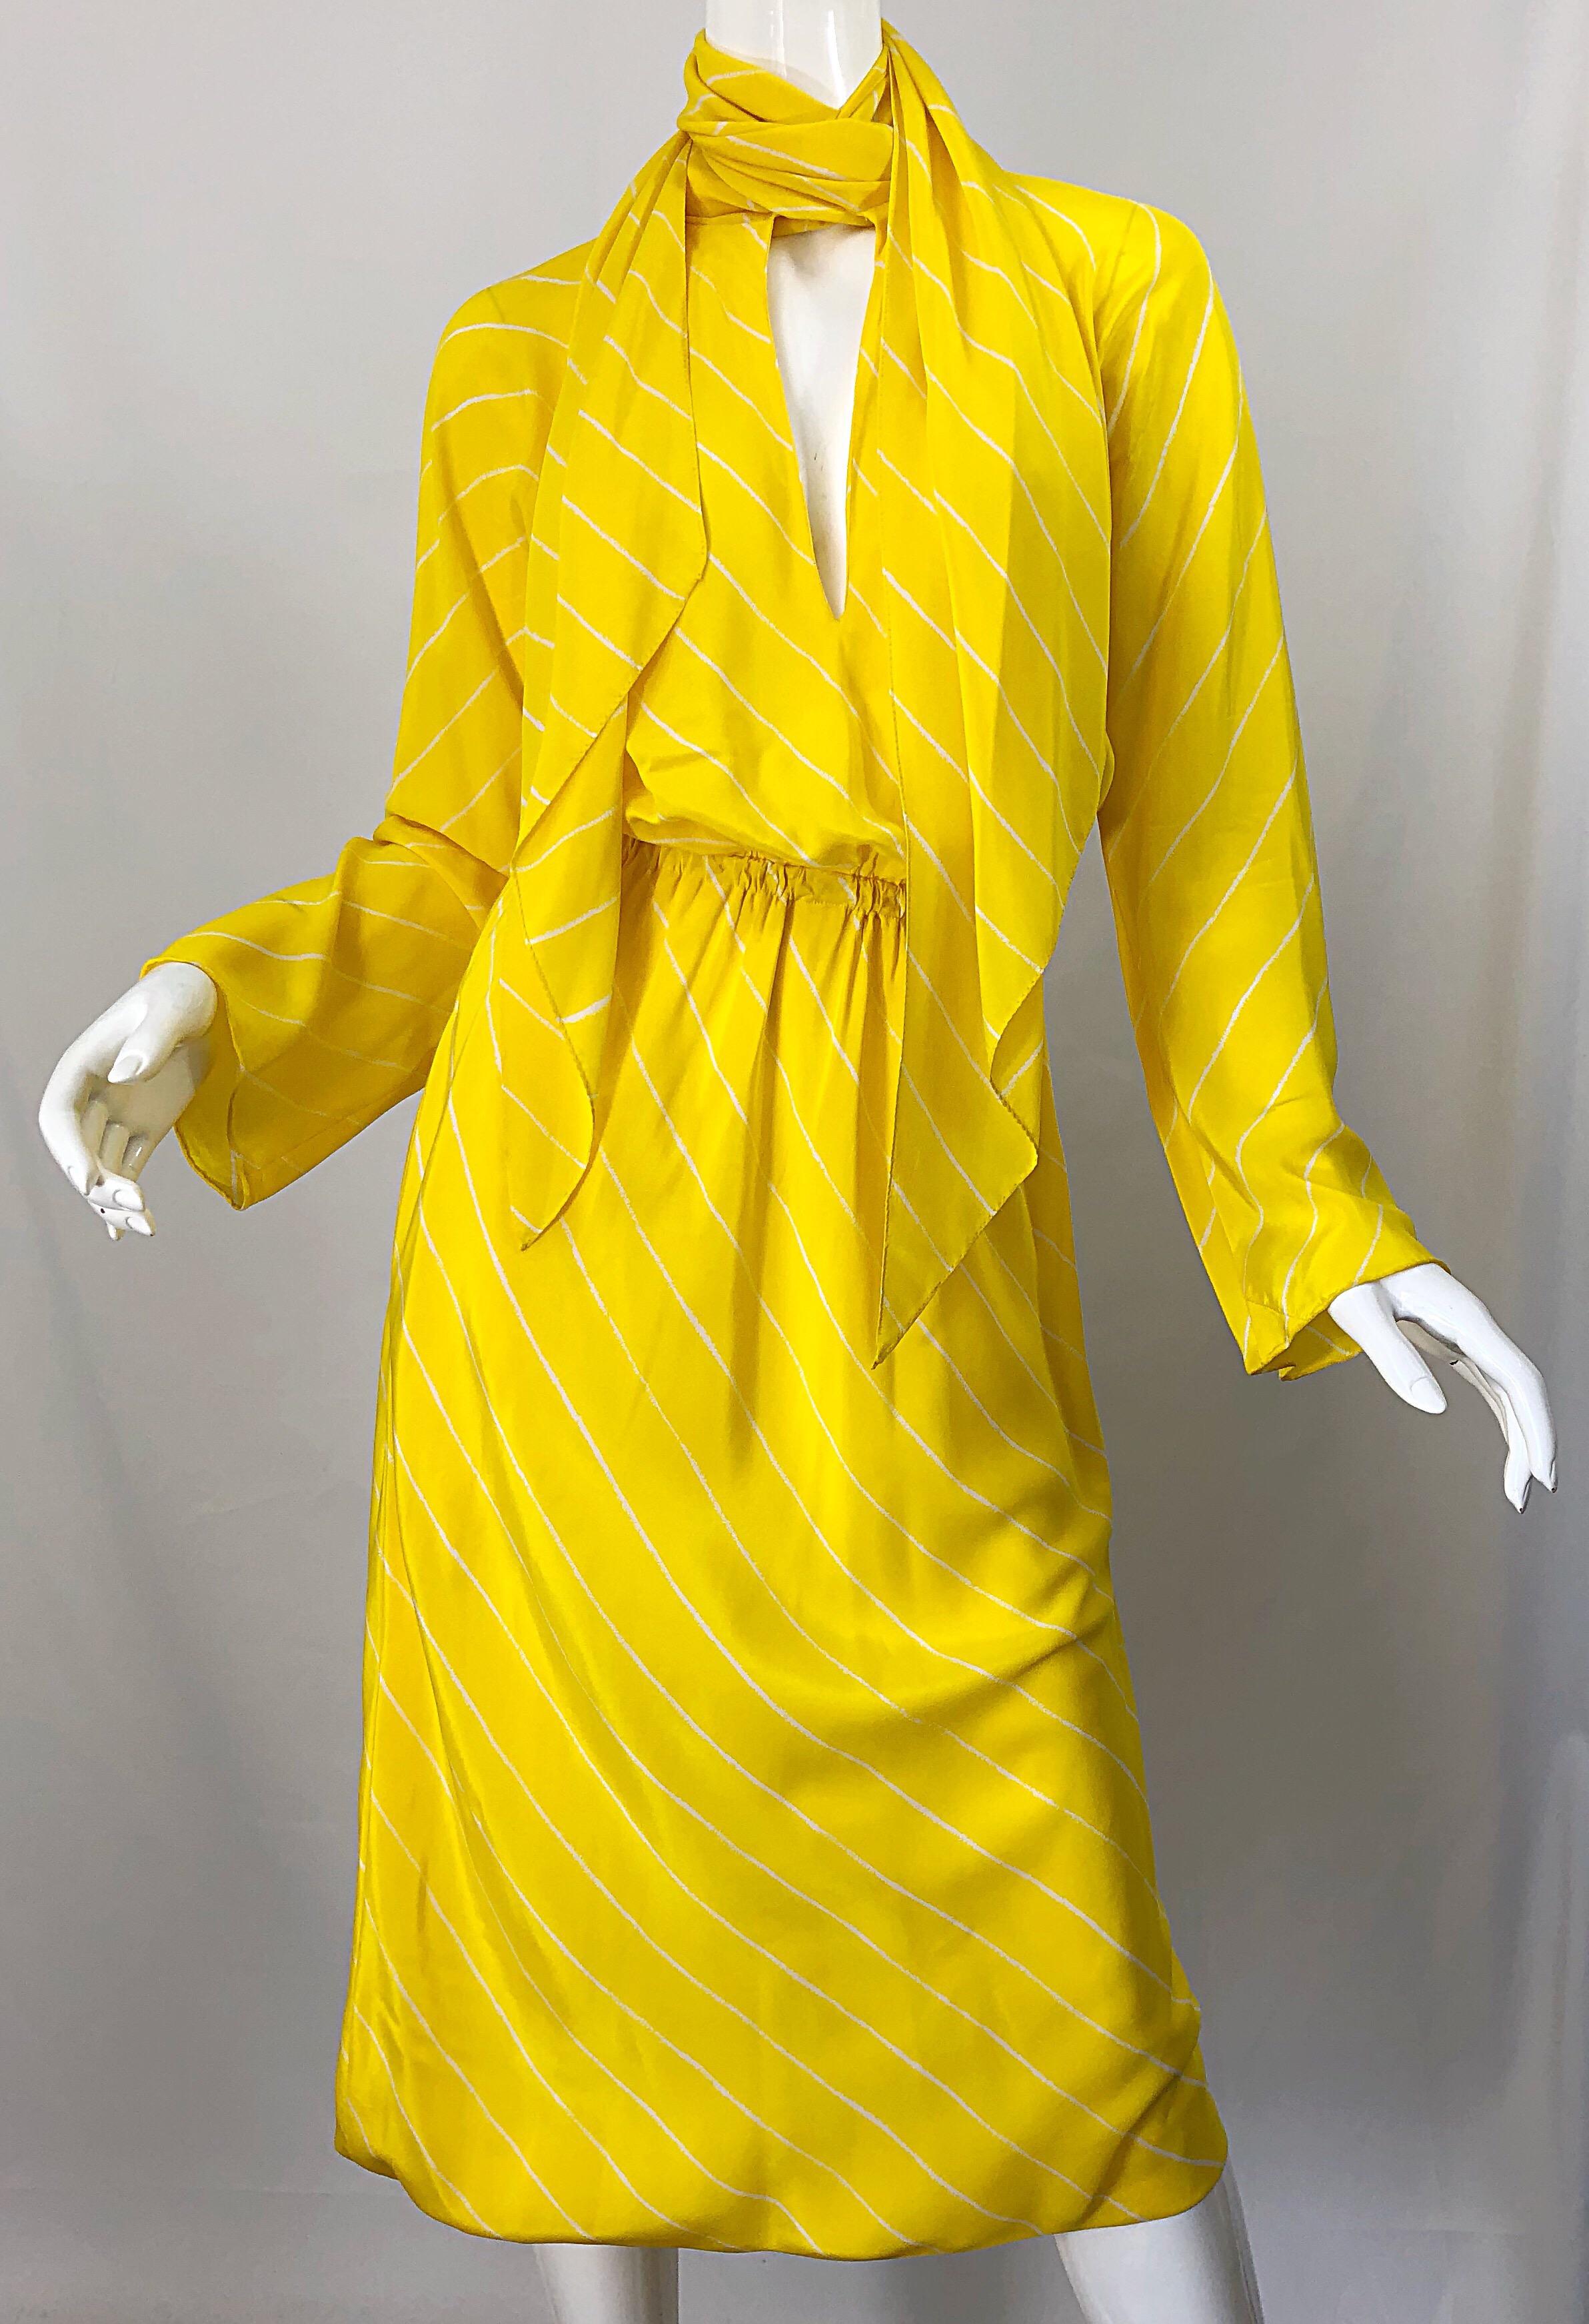 1970s Halston Canary Yellow + White Chevron Striped Bell Sleeve 70s Scarf Dress 5